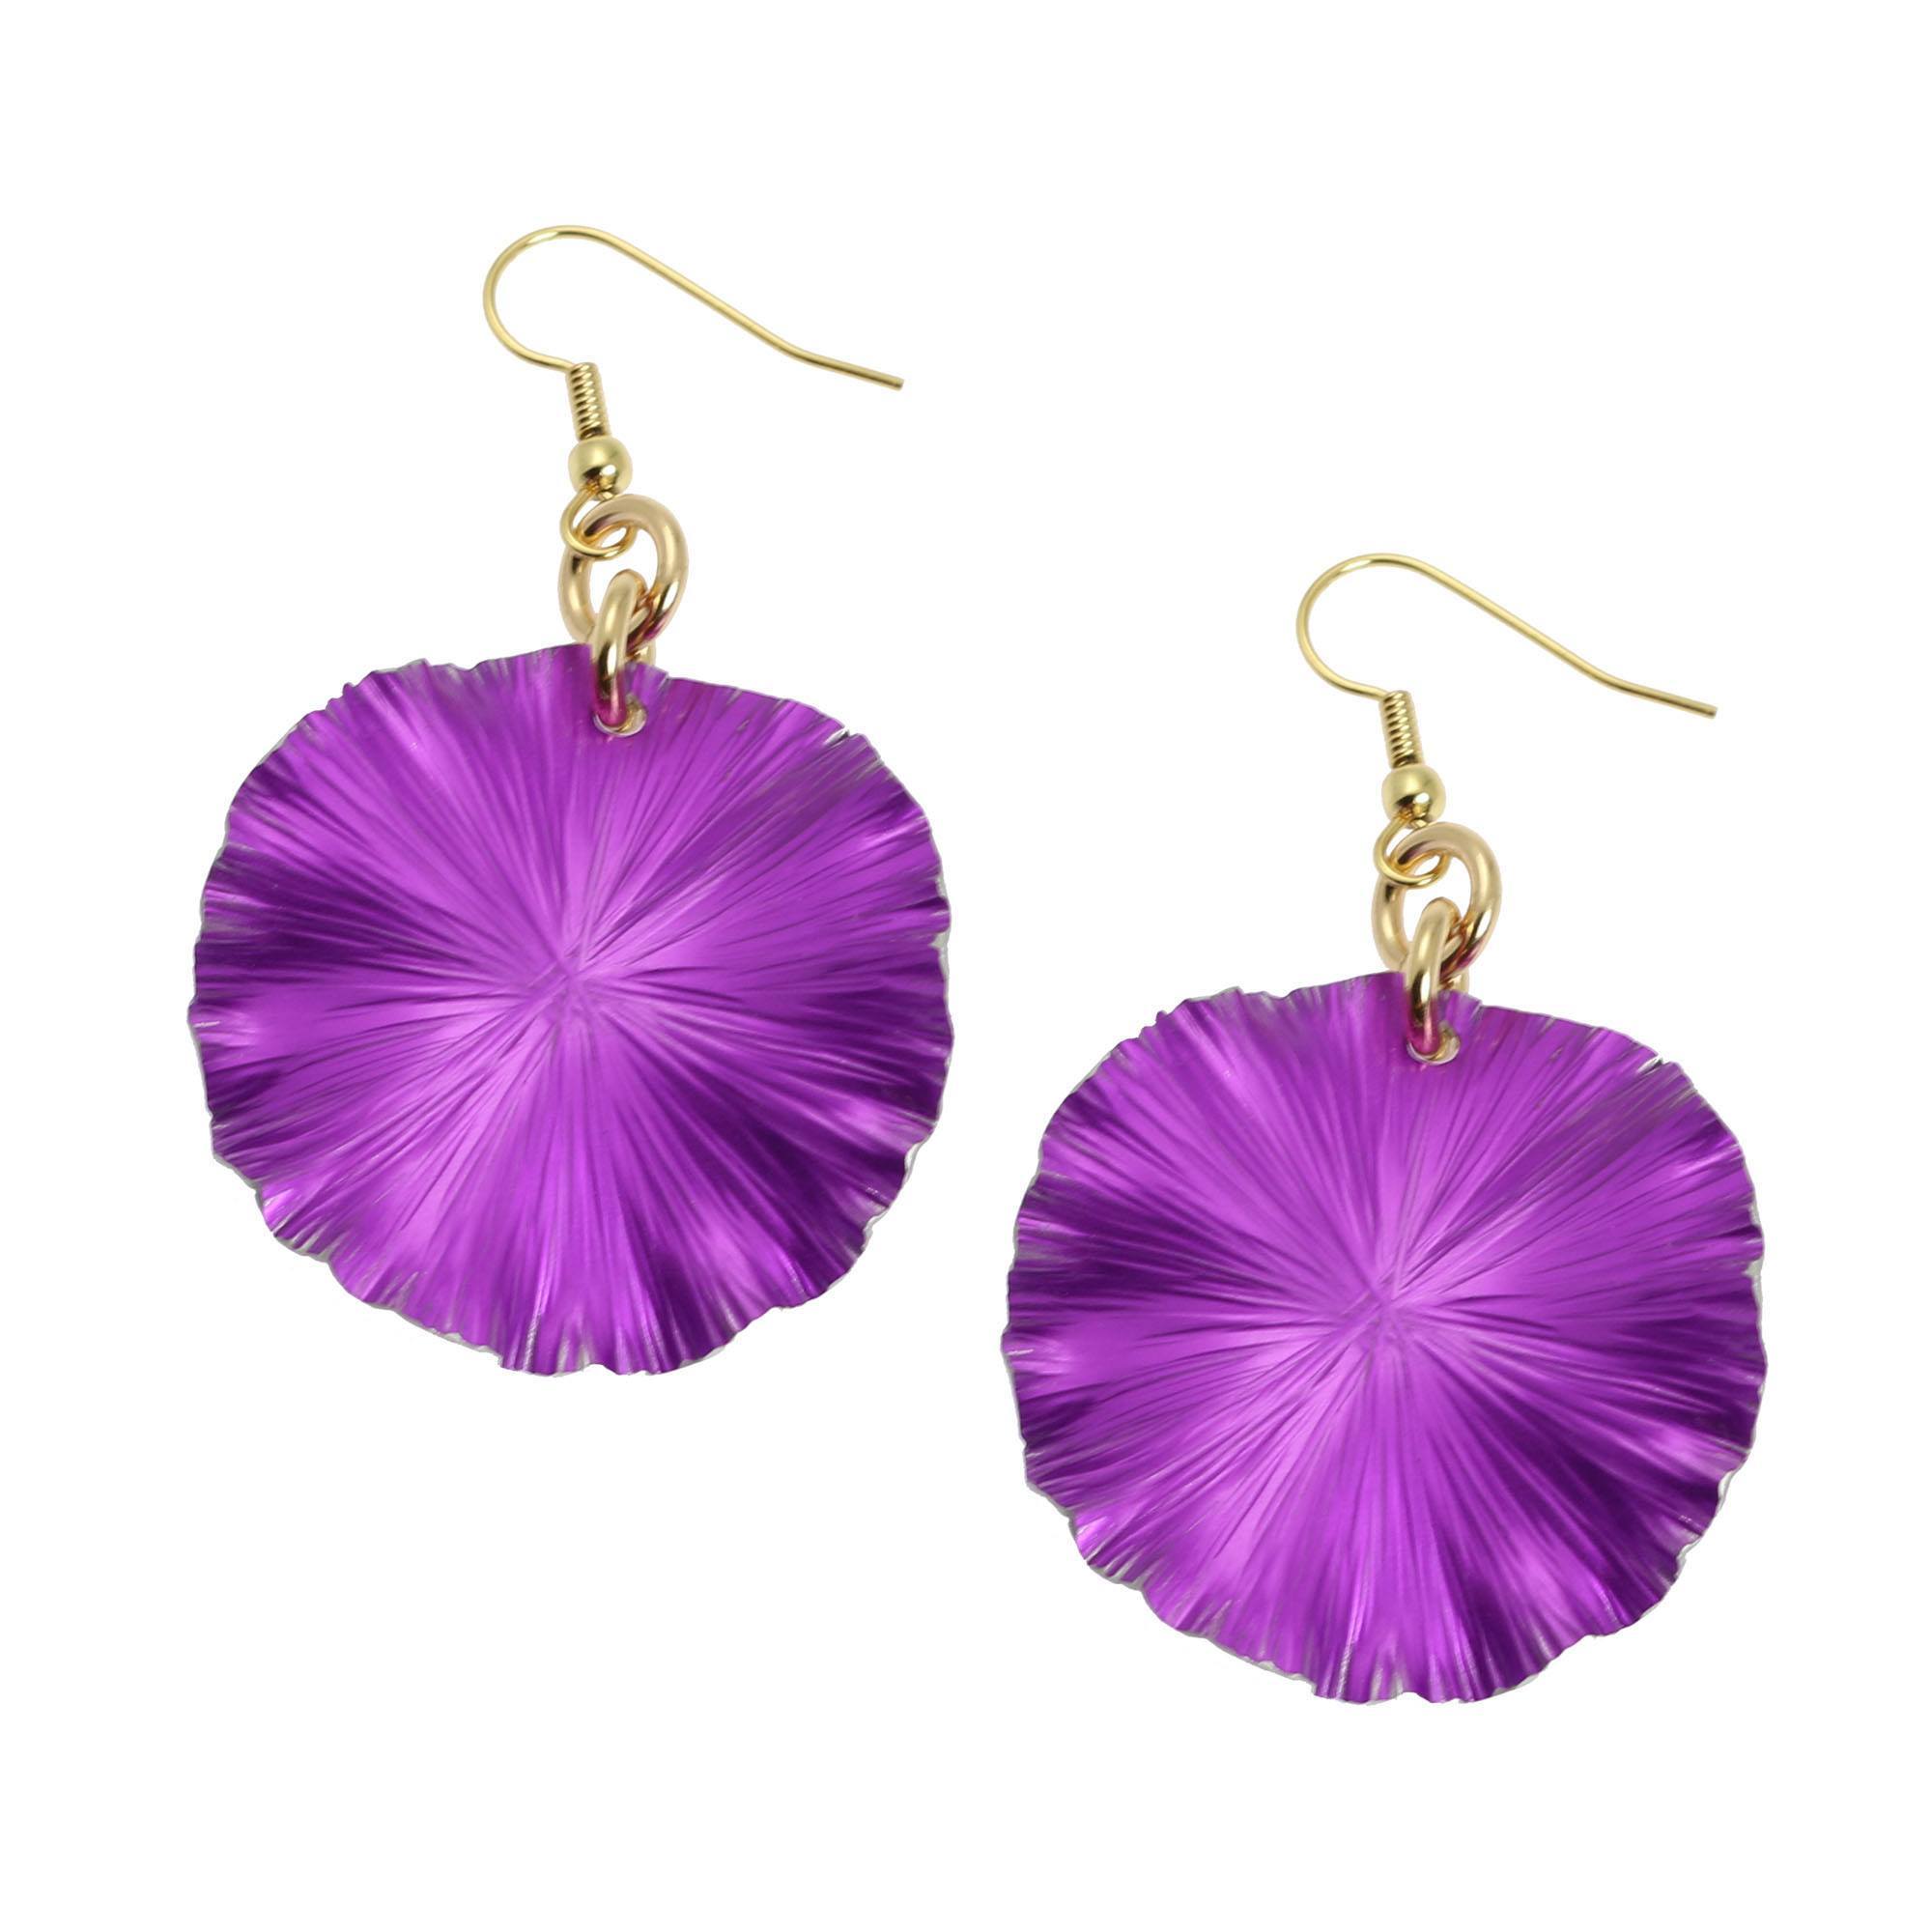 Violet Anodized Aluminum Lily Pad Earrings